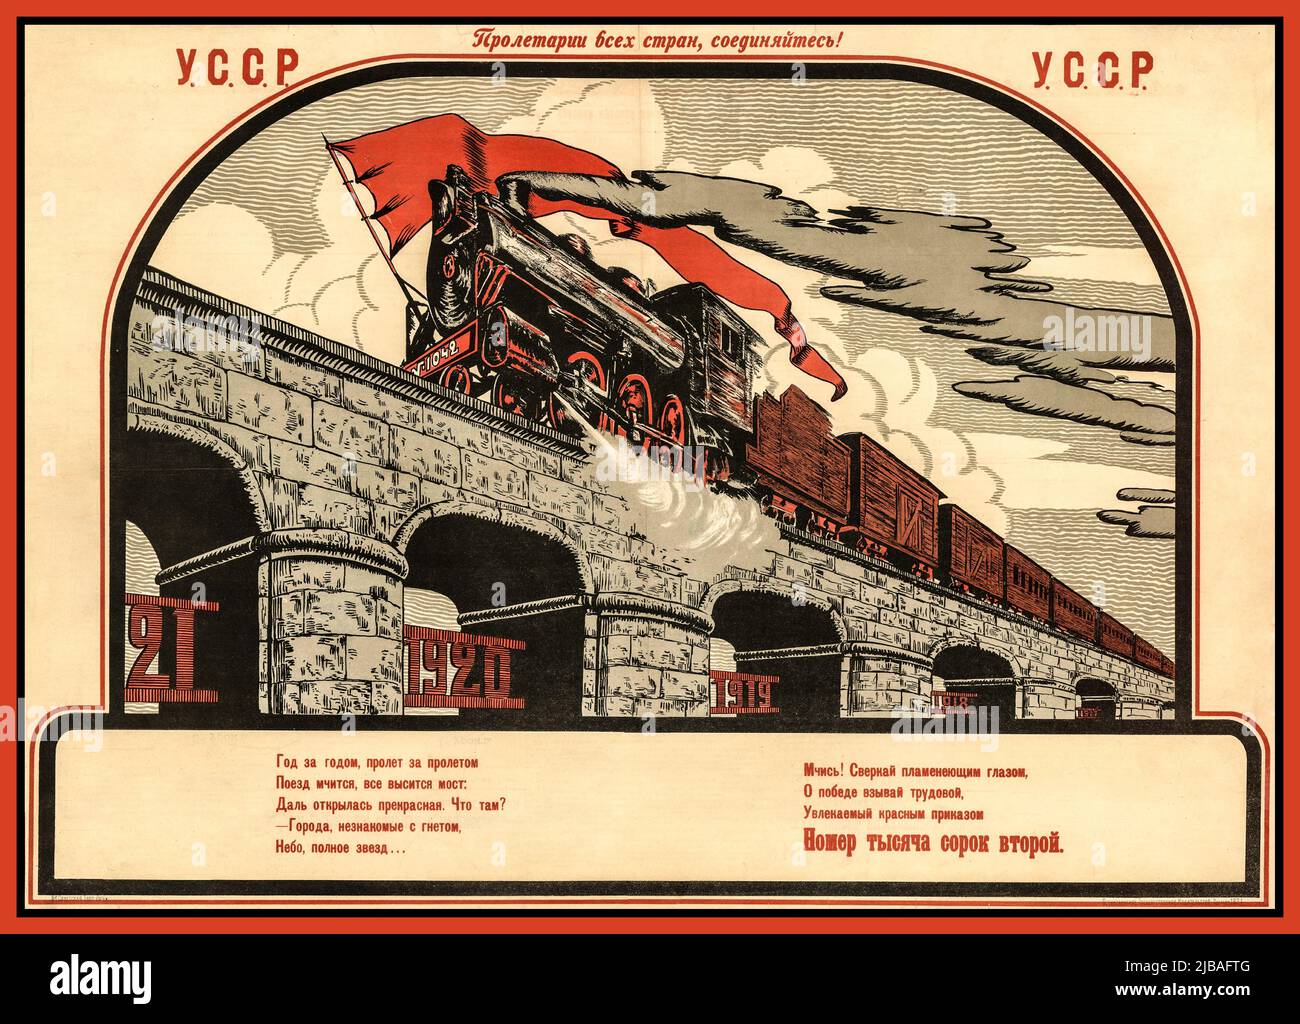 Vintage Ukraine Propaganda Poster 1920s  'Year after year, flight after flight, the train rushes, the bridge rises': [poster] YCCP. - Odessa: All-Ukrainian State Publishing House, 1921 (Odessa: 8th Soviet Typography). - Color lithography, Date 1921 Stock Photo